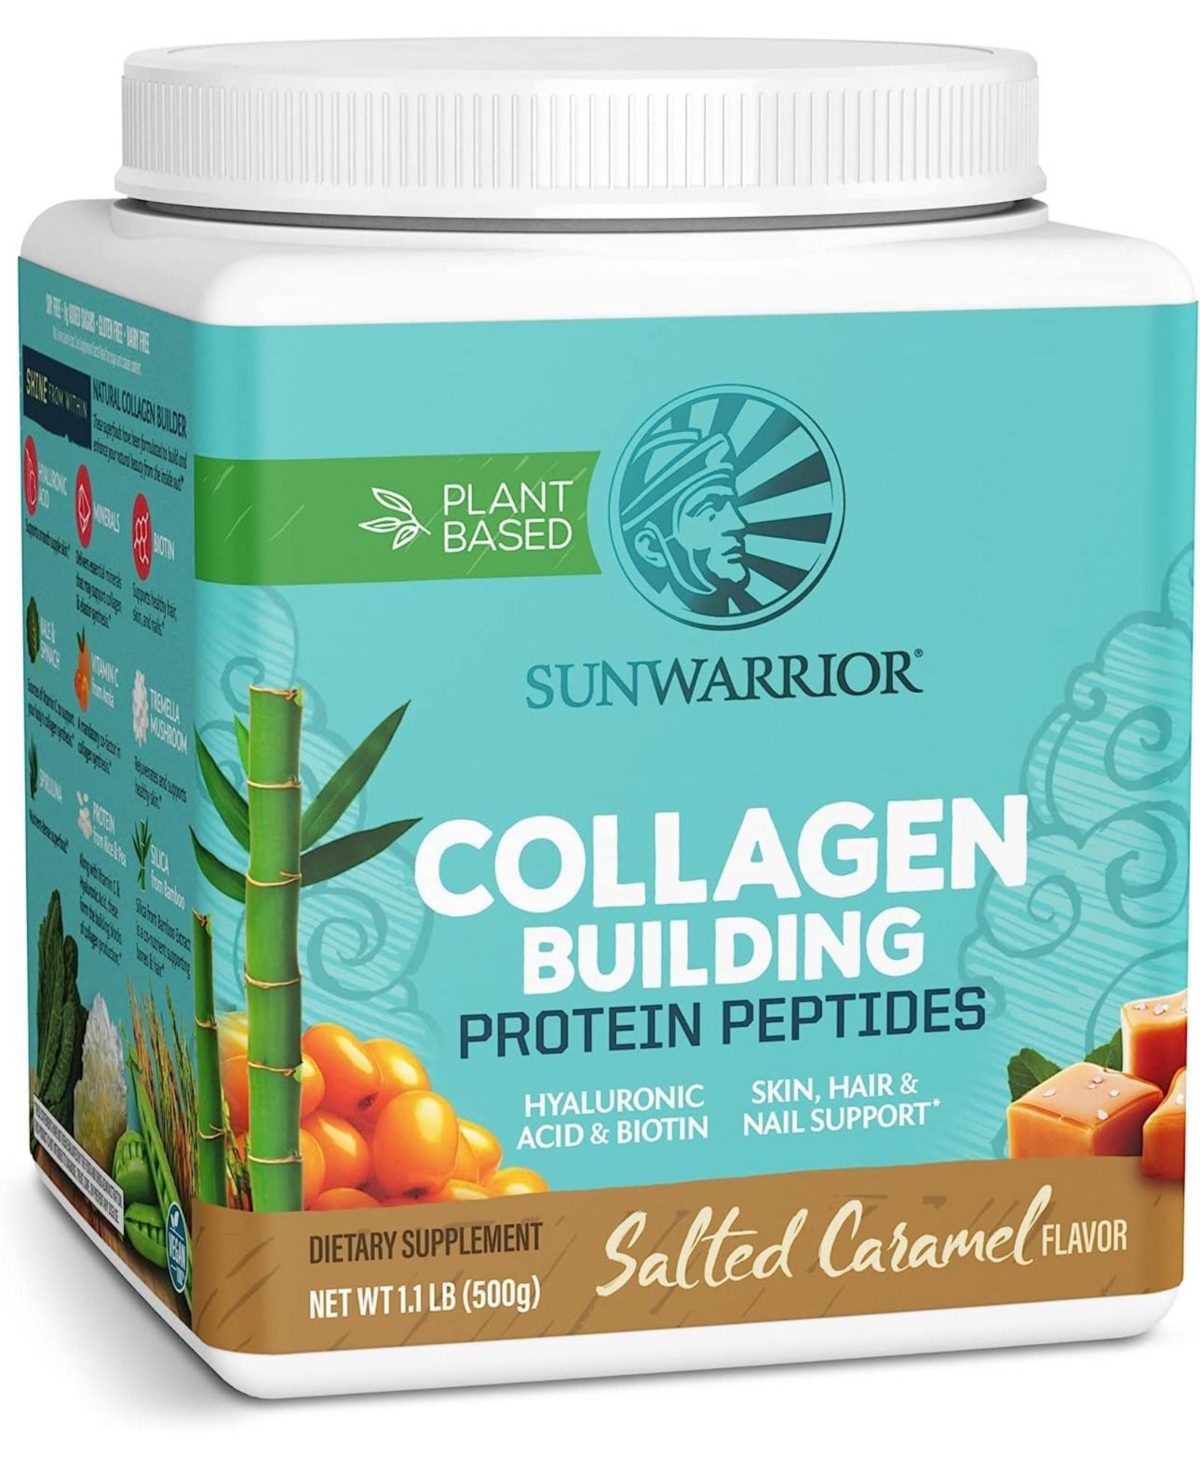 Collagen Building Peptides Protein Powder Hyaluronic Acid & Biotin Hair Skin Nail Support Gluten Free Non-gmo Dairy Sugar Free Low Carb Pla